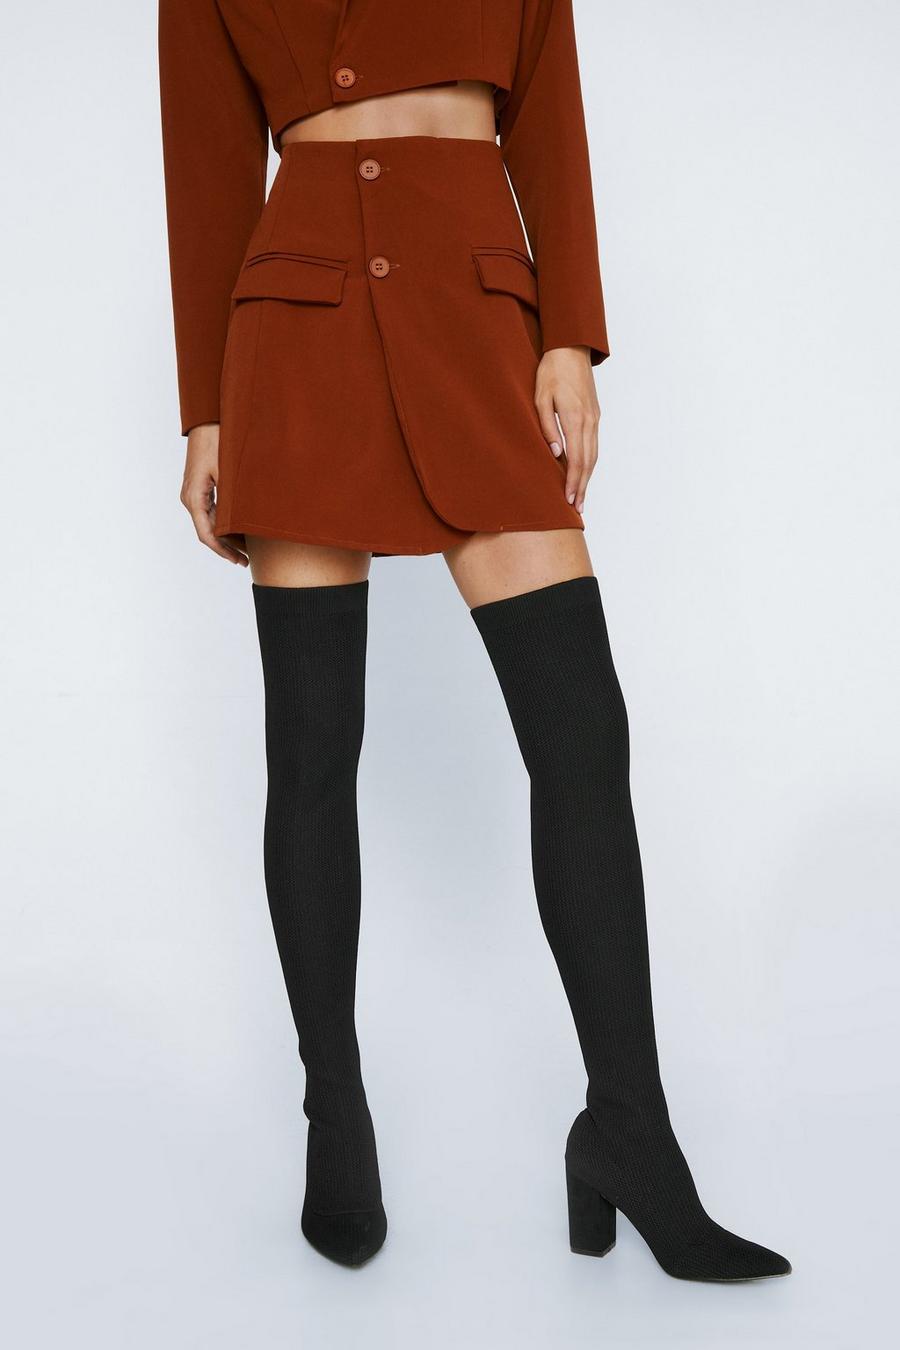 Stretch Knit Over The Knee Block Heel Boots